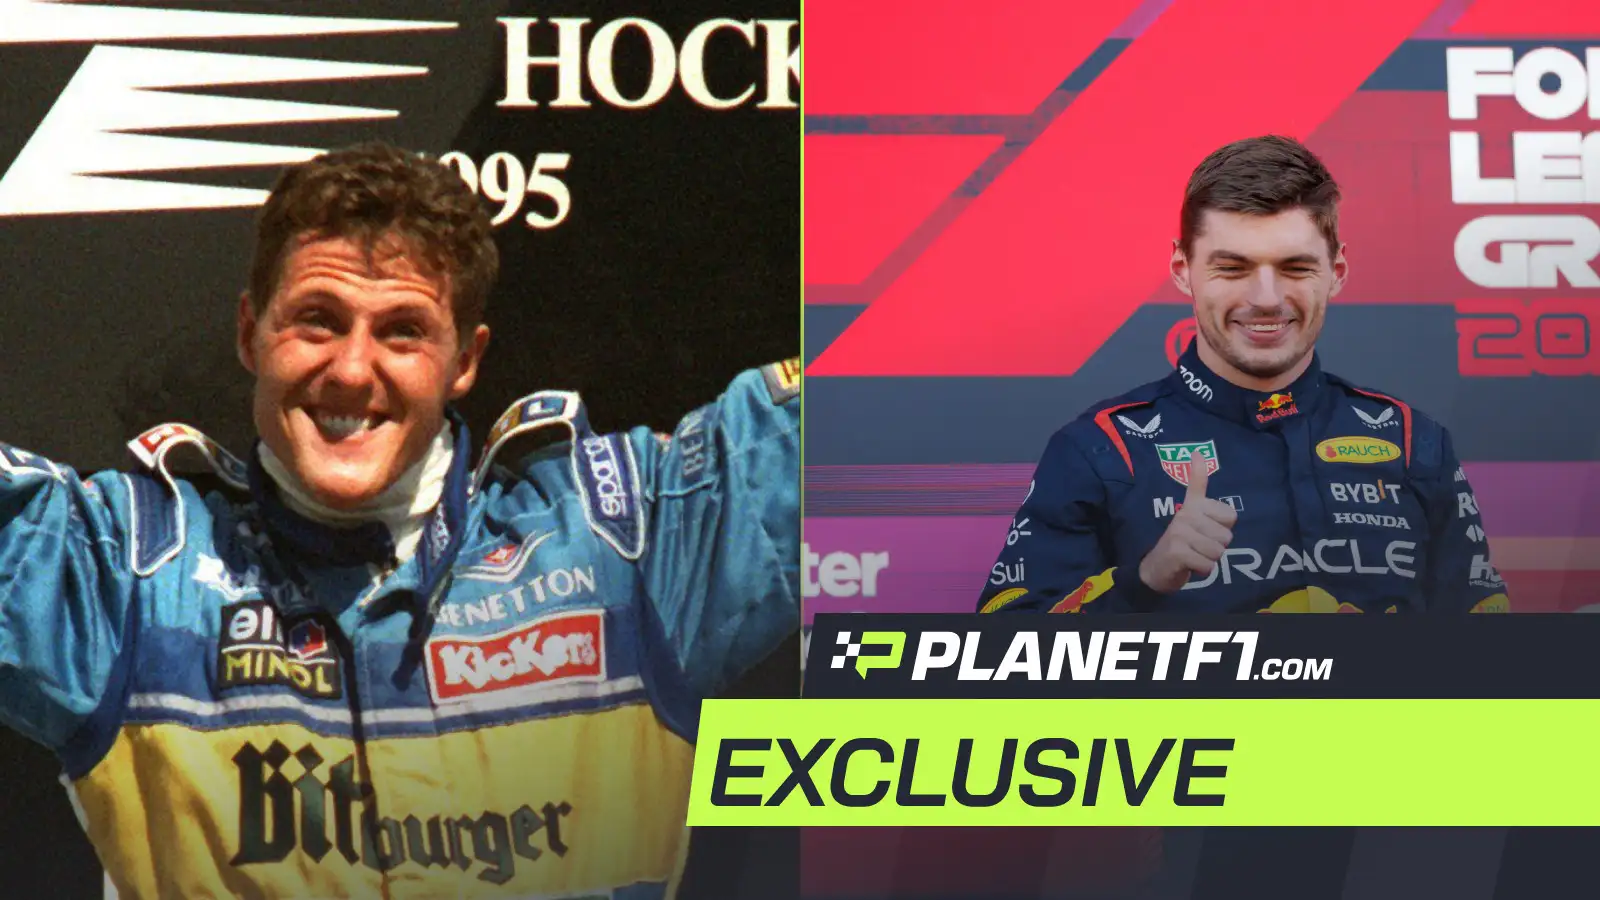 Michael Schumacher stands on the podium as a race winner for Benetton in 1995, and Max Verstappen in the paddock for Red Bull in 2023.